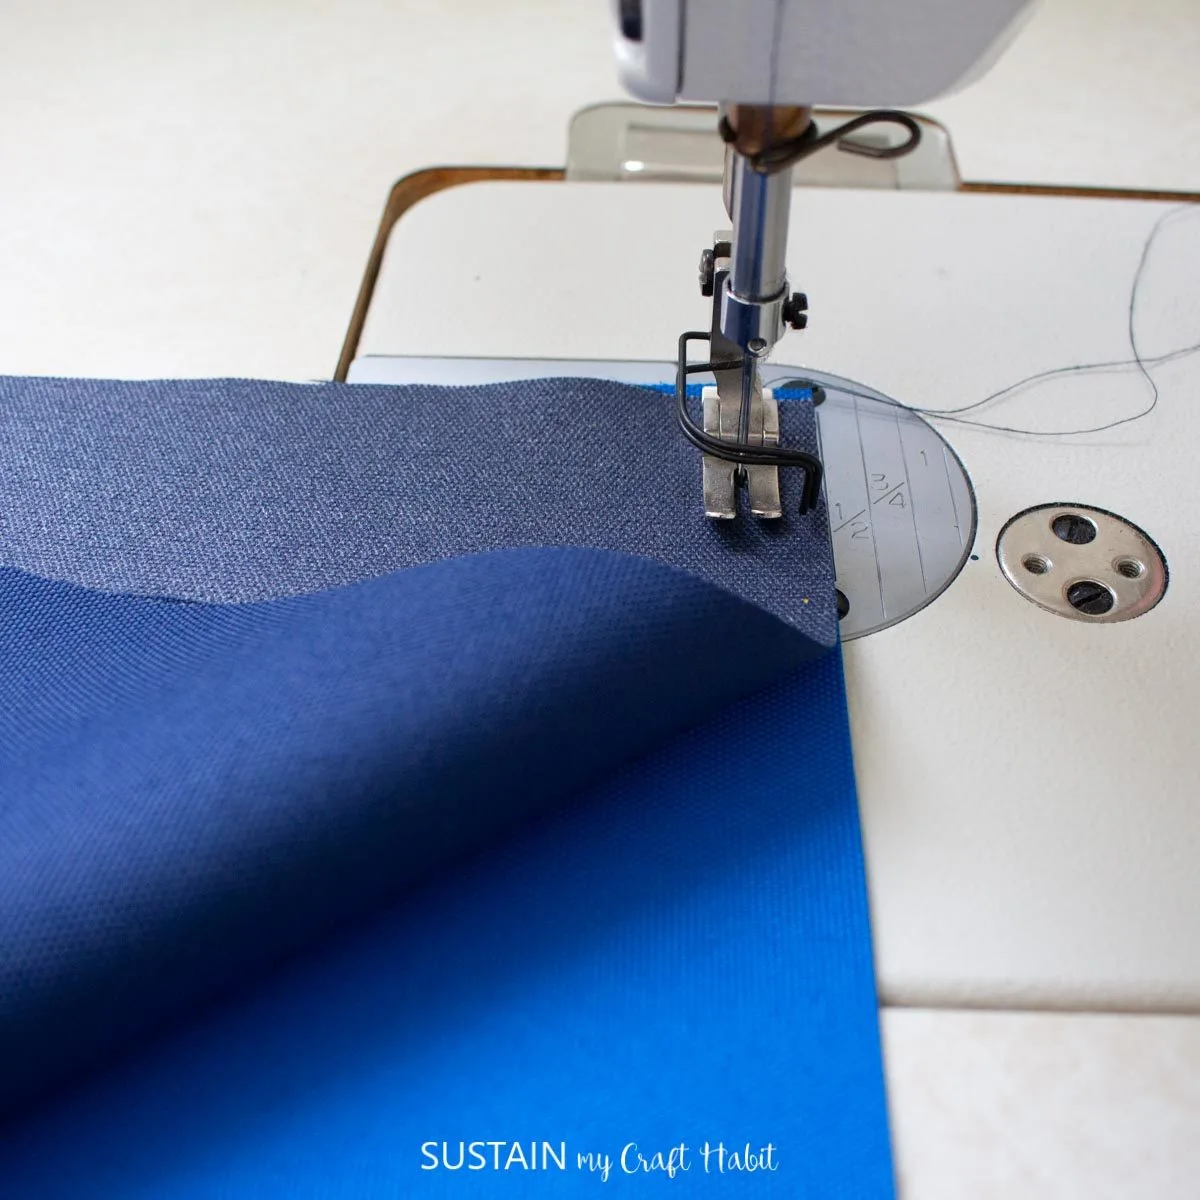 Sewing the blue fabric together.